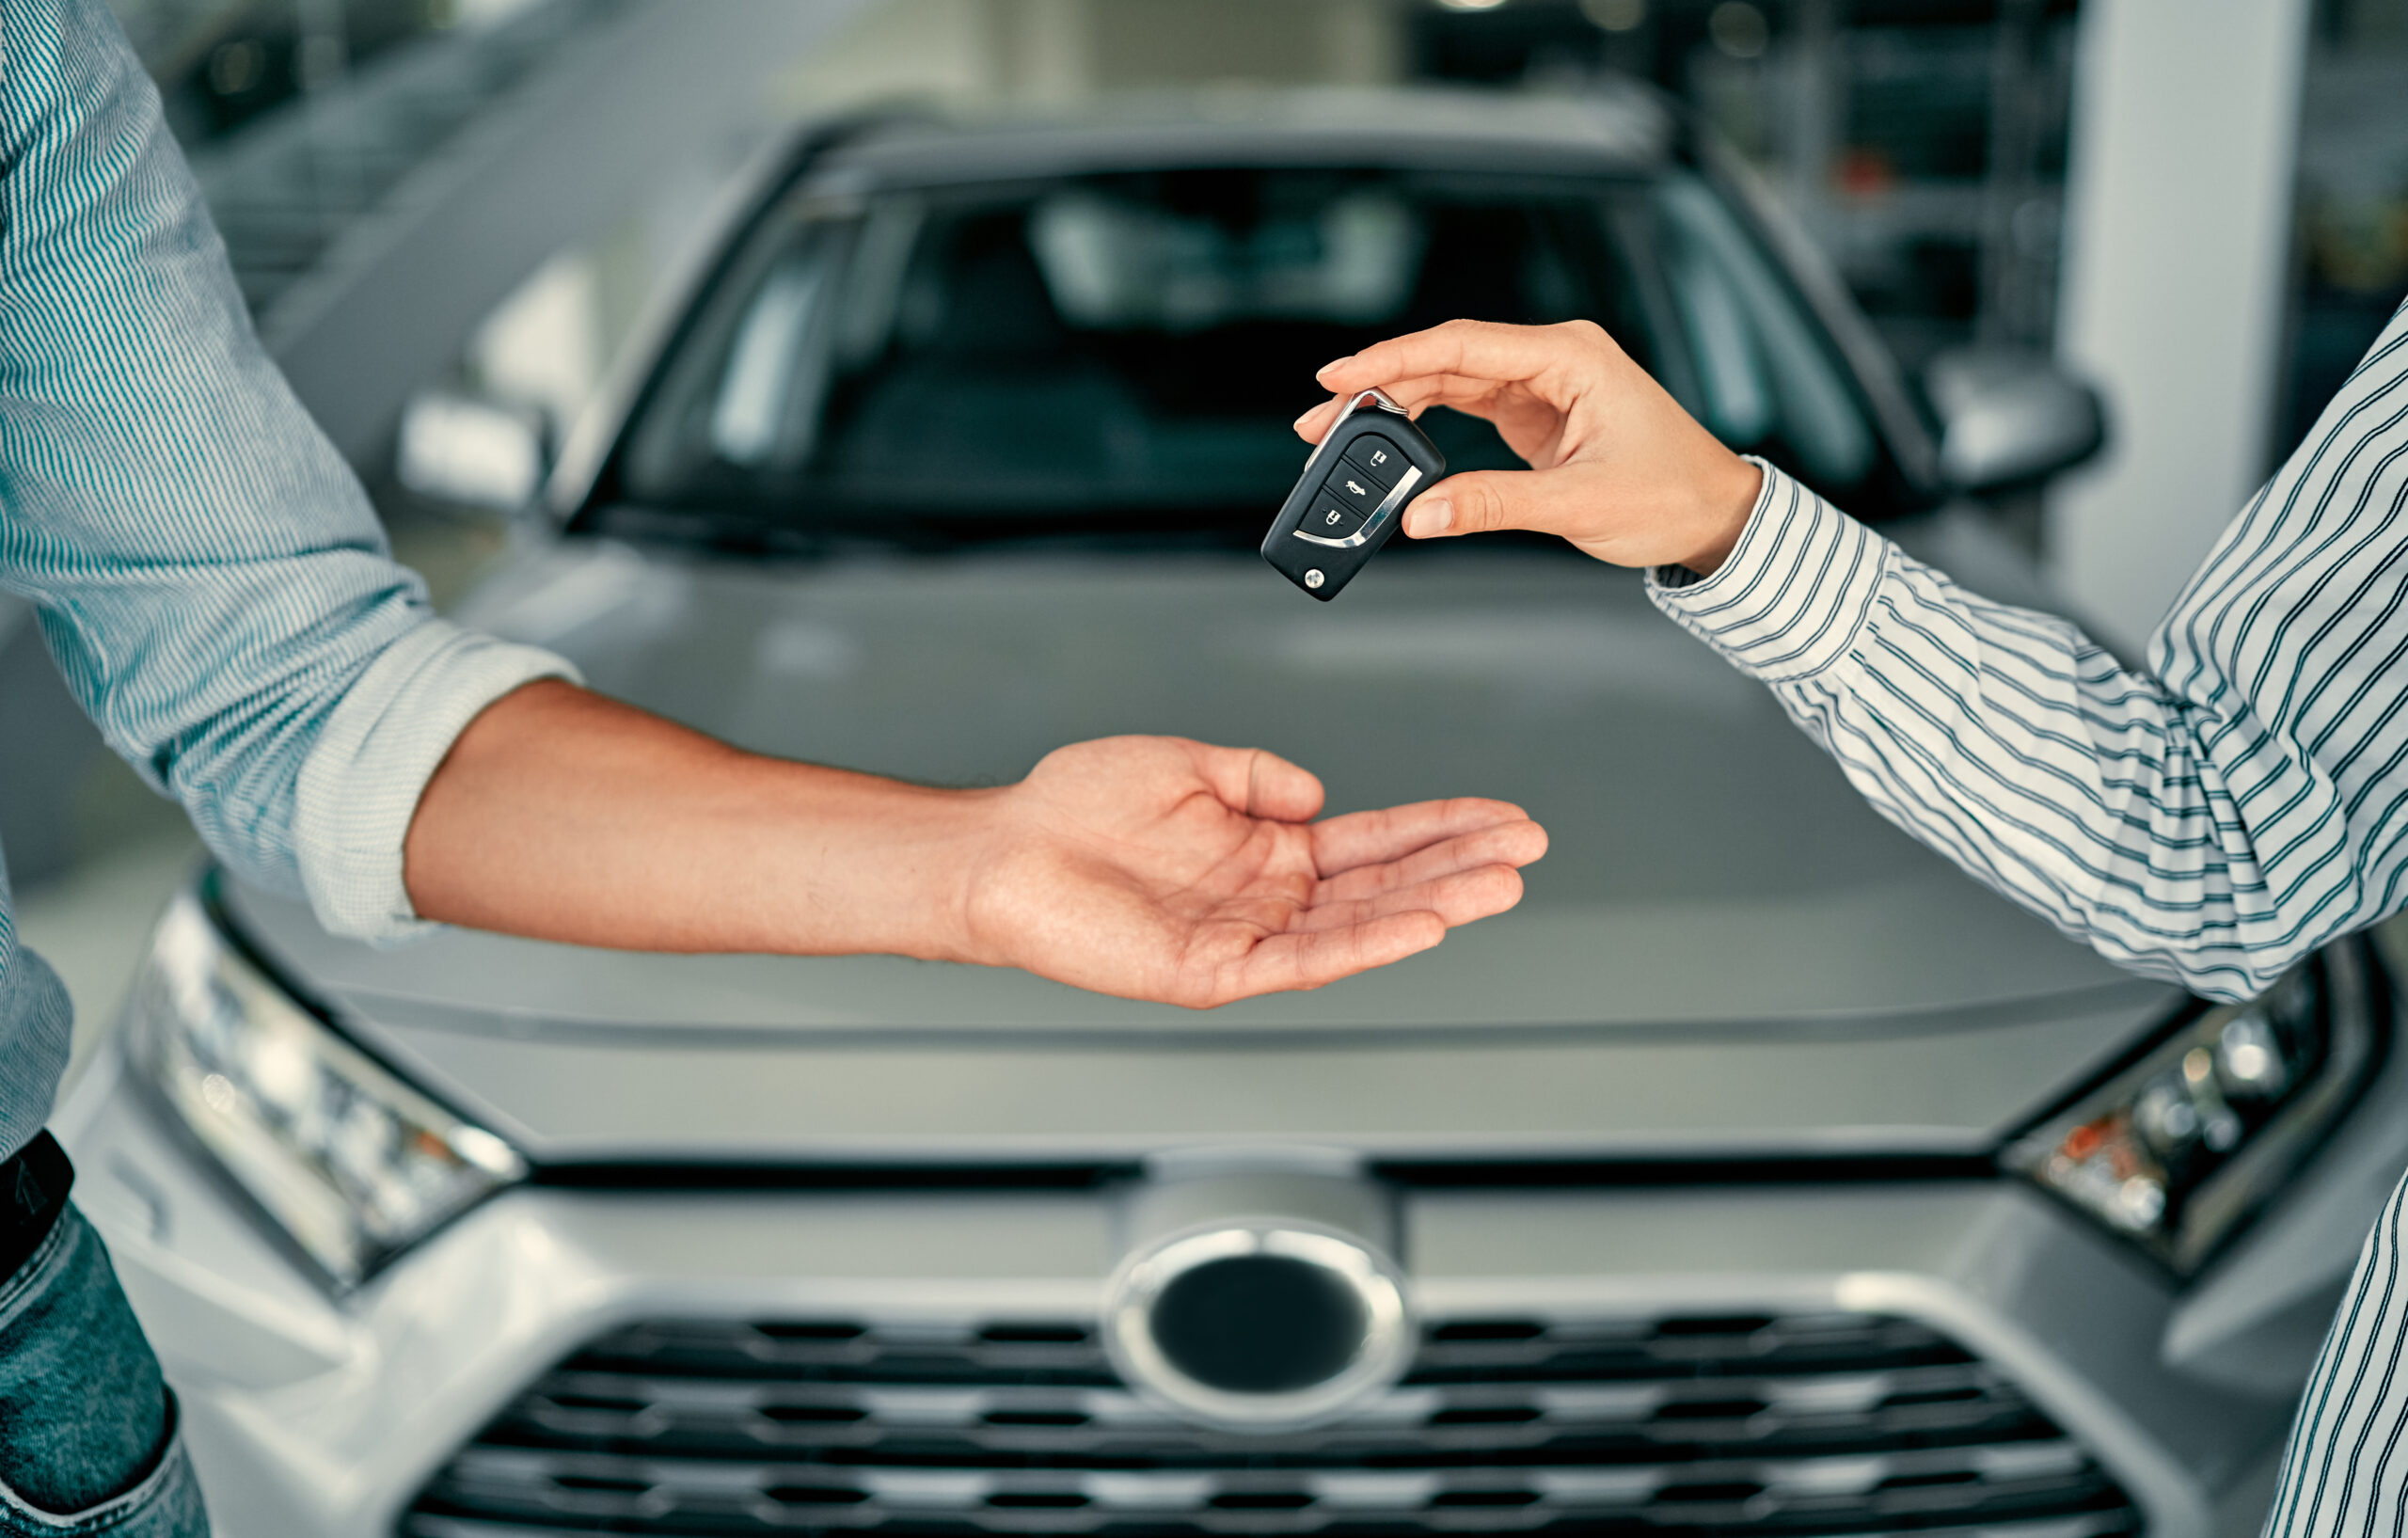 Car keys changing hands when buying new vehicle